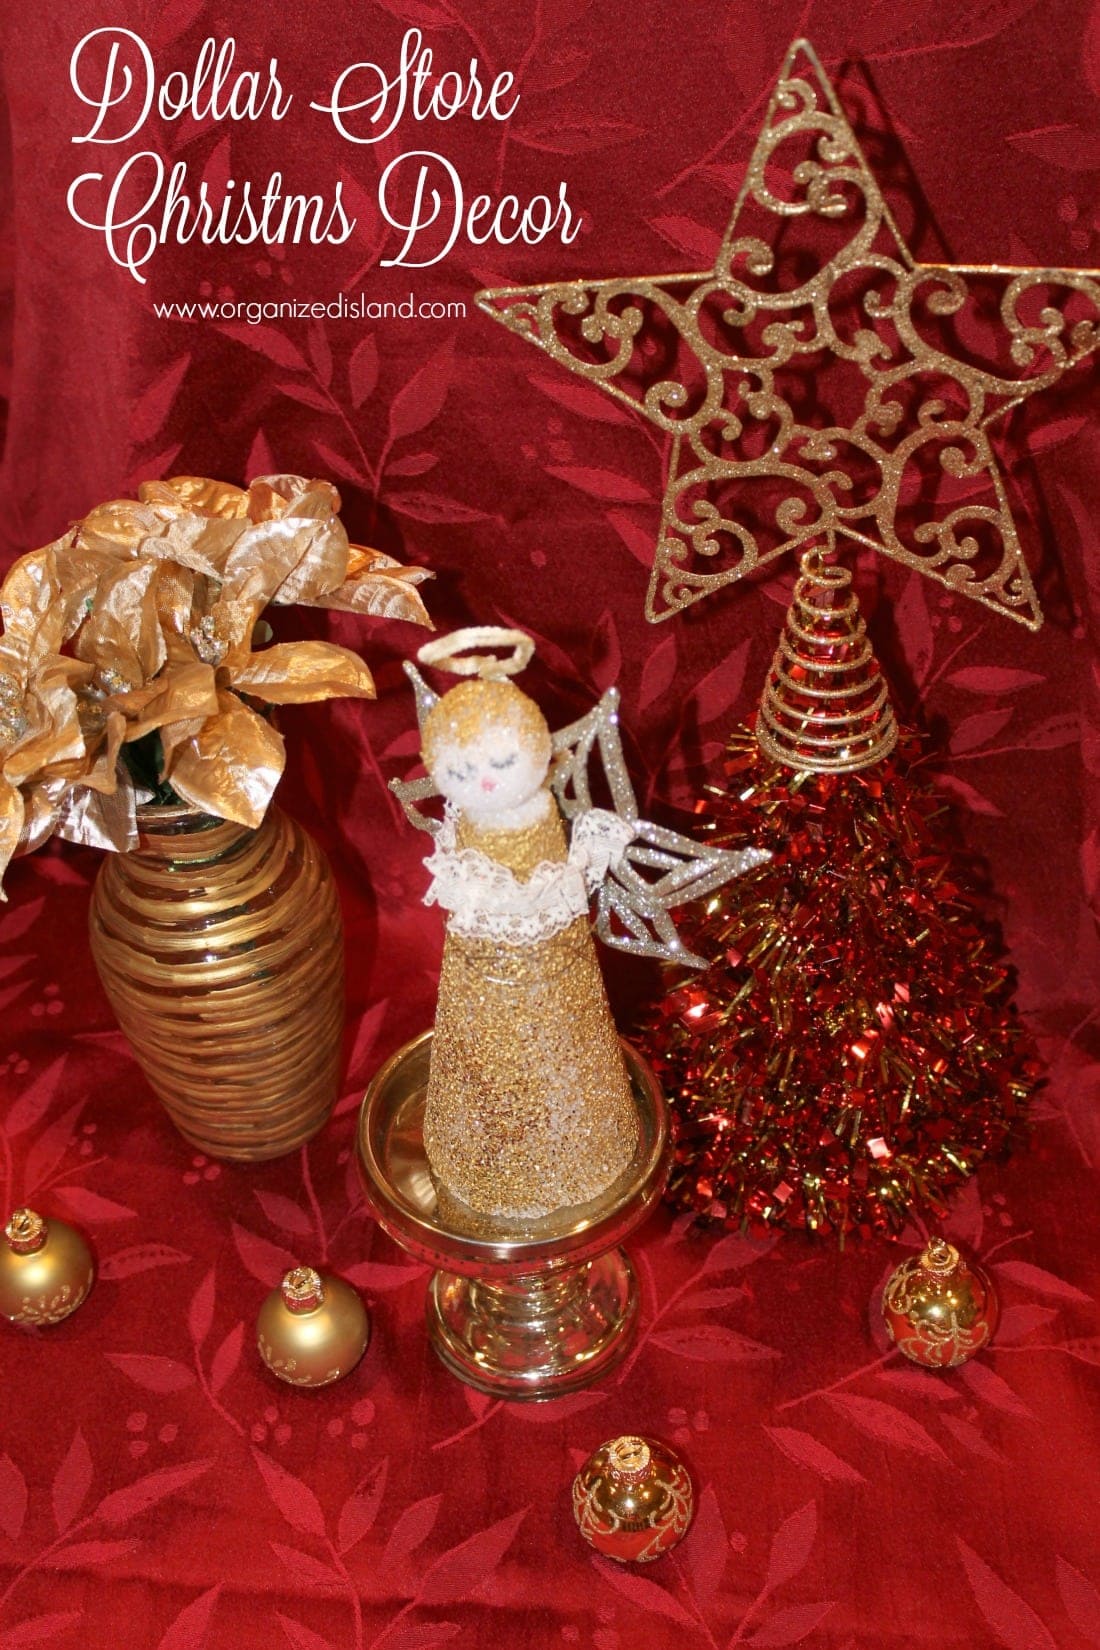 20 Easy and Cheap Dollar Store Christmas Decorations you can make at home!! #dollarstore #dollarstorecrafts #christmasdecor #christmascrafts #christmasdecorations #budget #cheap #dollargeneral #dollartree